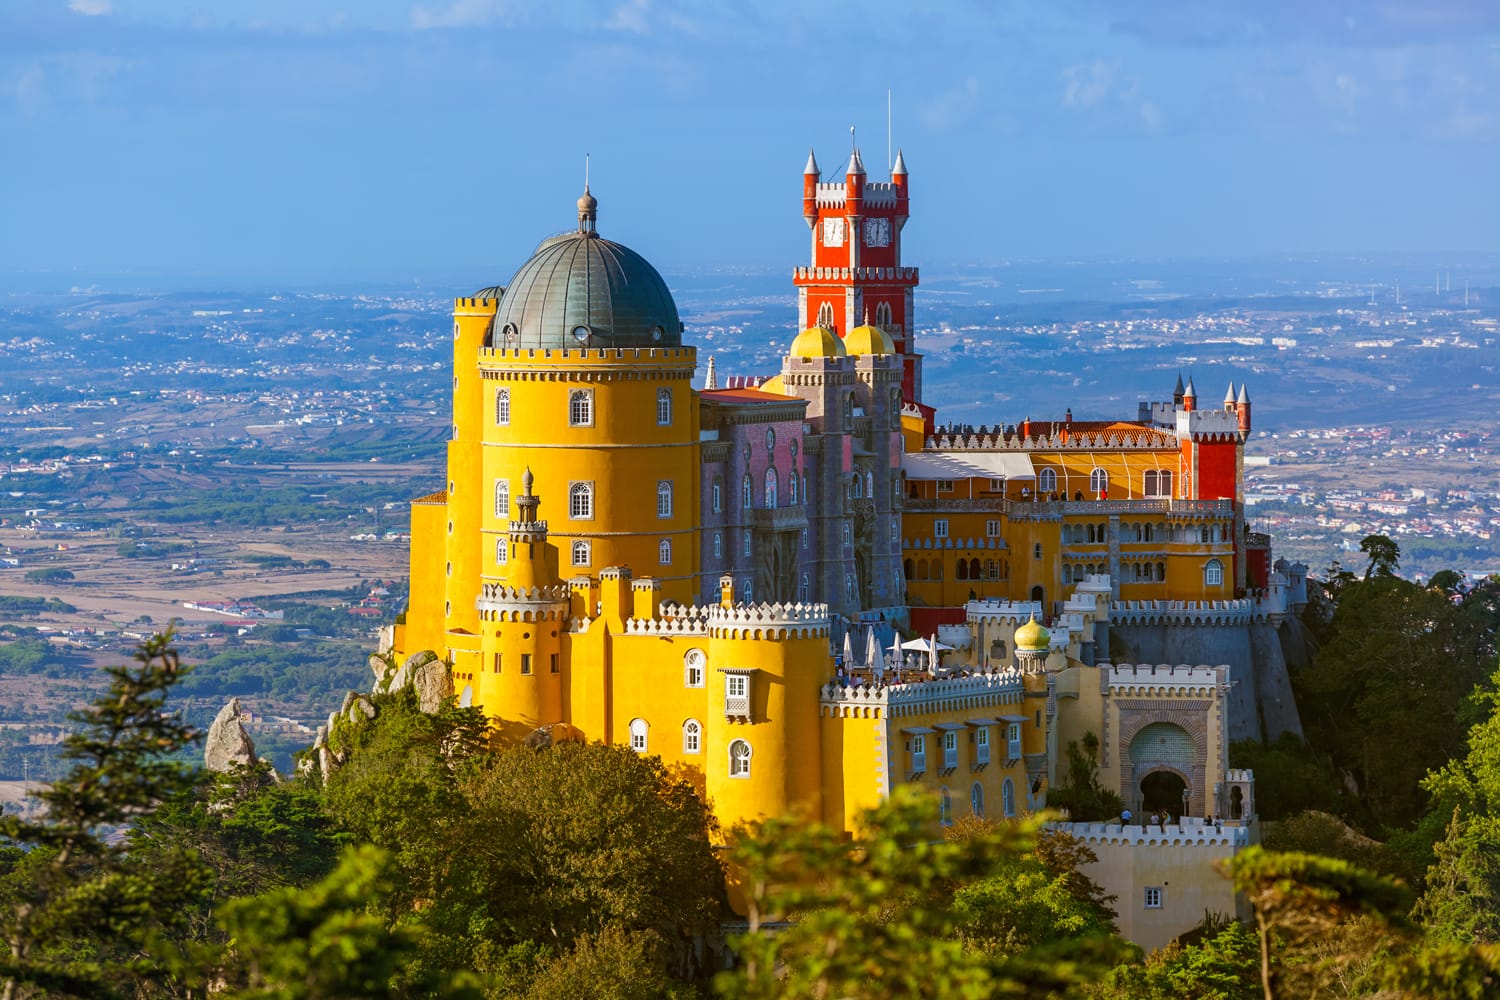 A Tourism Guide For 2022 For Sintra, Portugal